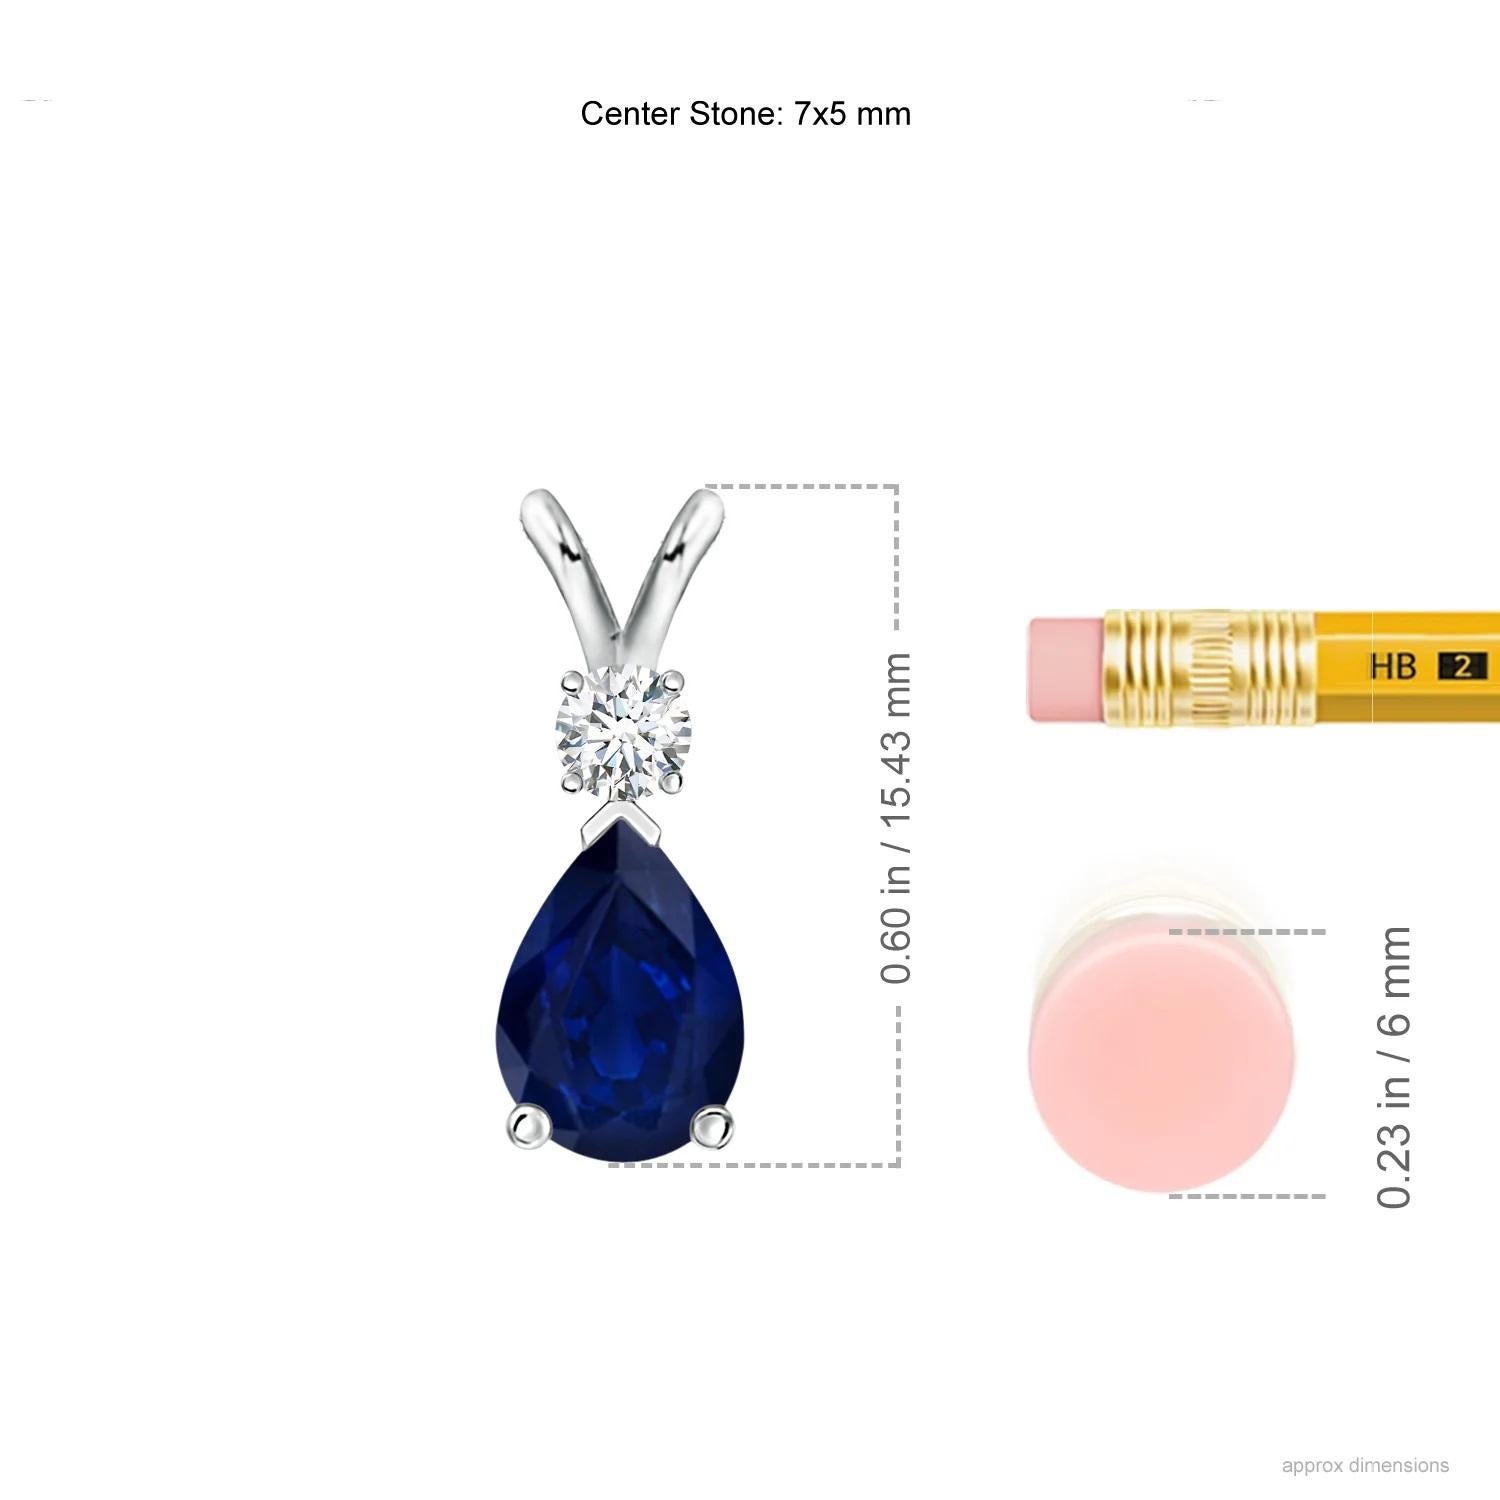 This classic solitaire pendant features a pear-shaped sapphire secured in a prong setting. A brilliant round diamond sits atop the blue gemstone adding to the design's charm. Simple yet appealing, this sapphire pendant in platinum is crafted with a